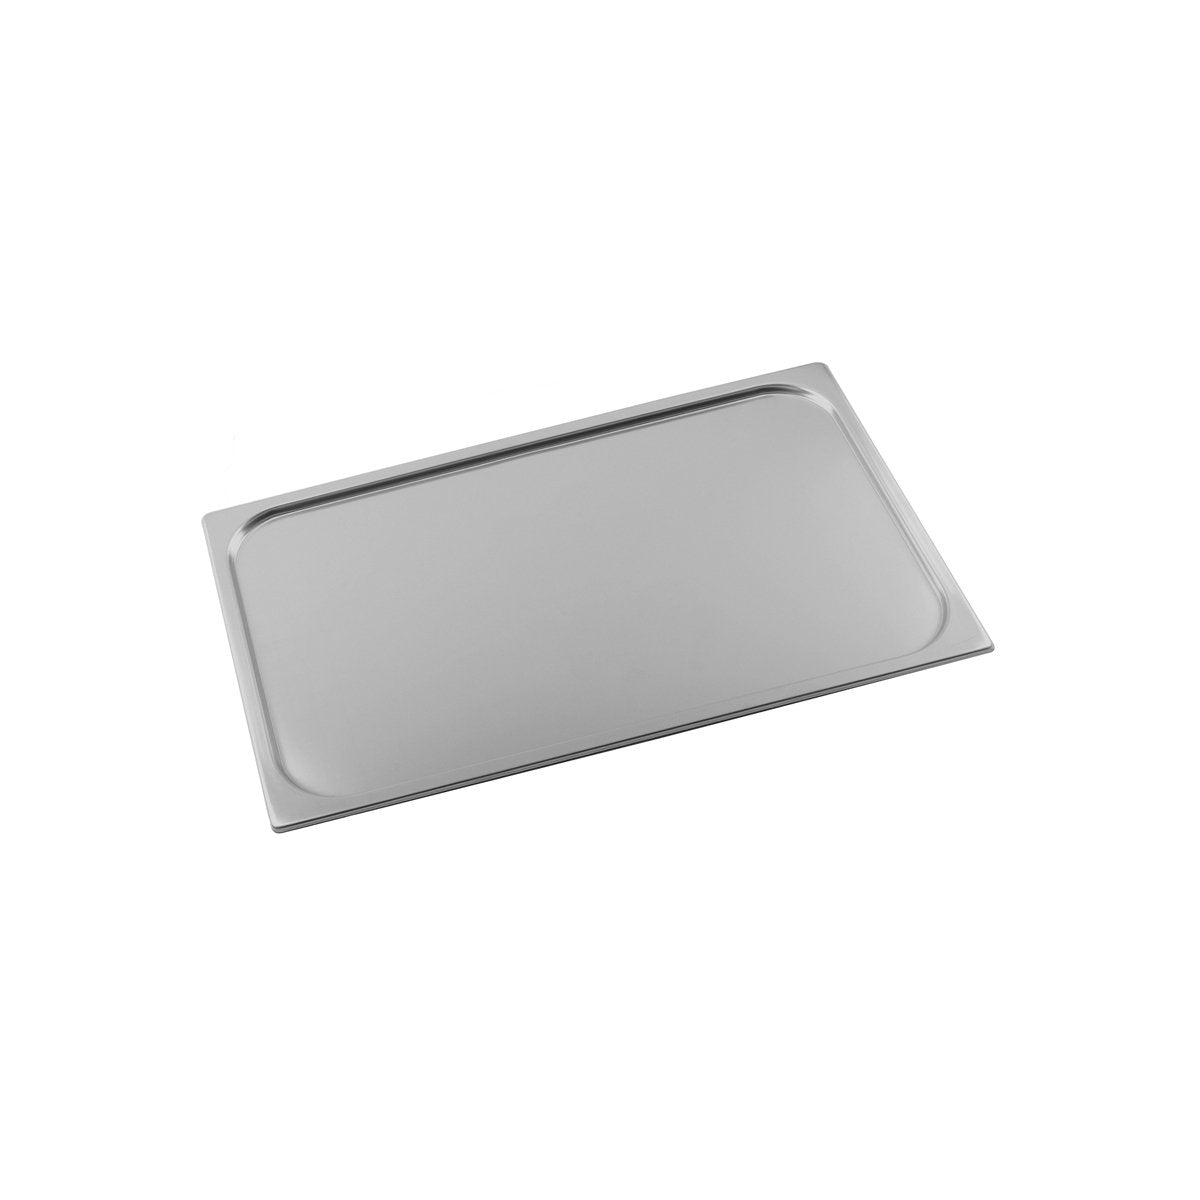 M-111R Inox Macel Maxipan Gastronorm Raised Lid Suitable For Cook Chill 1/1 Size Tomkin Australia Hospitality Supplies